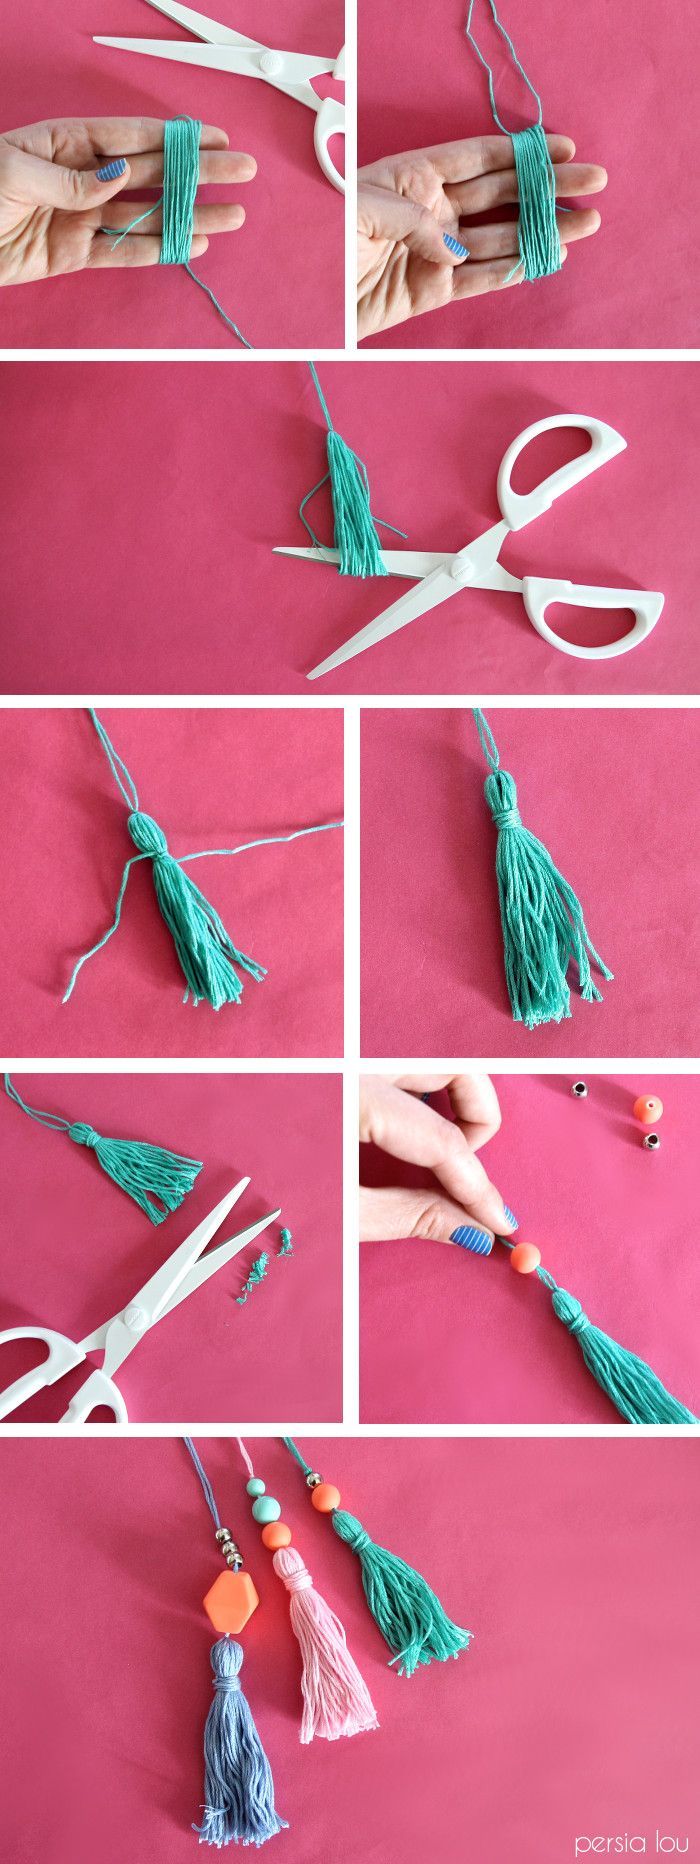 How to make beaded tassels – add to a bag!